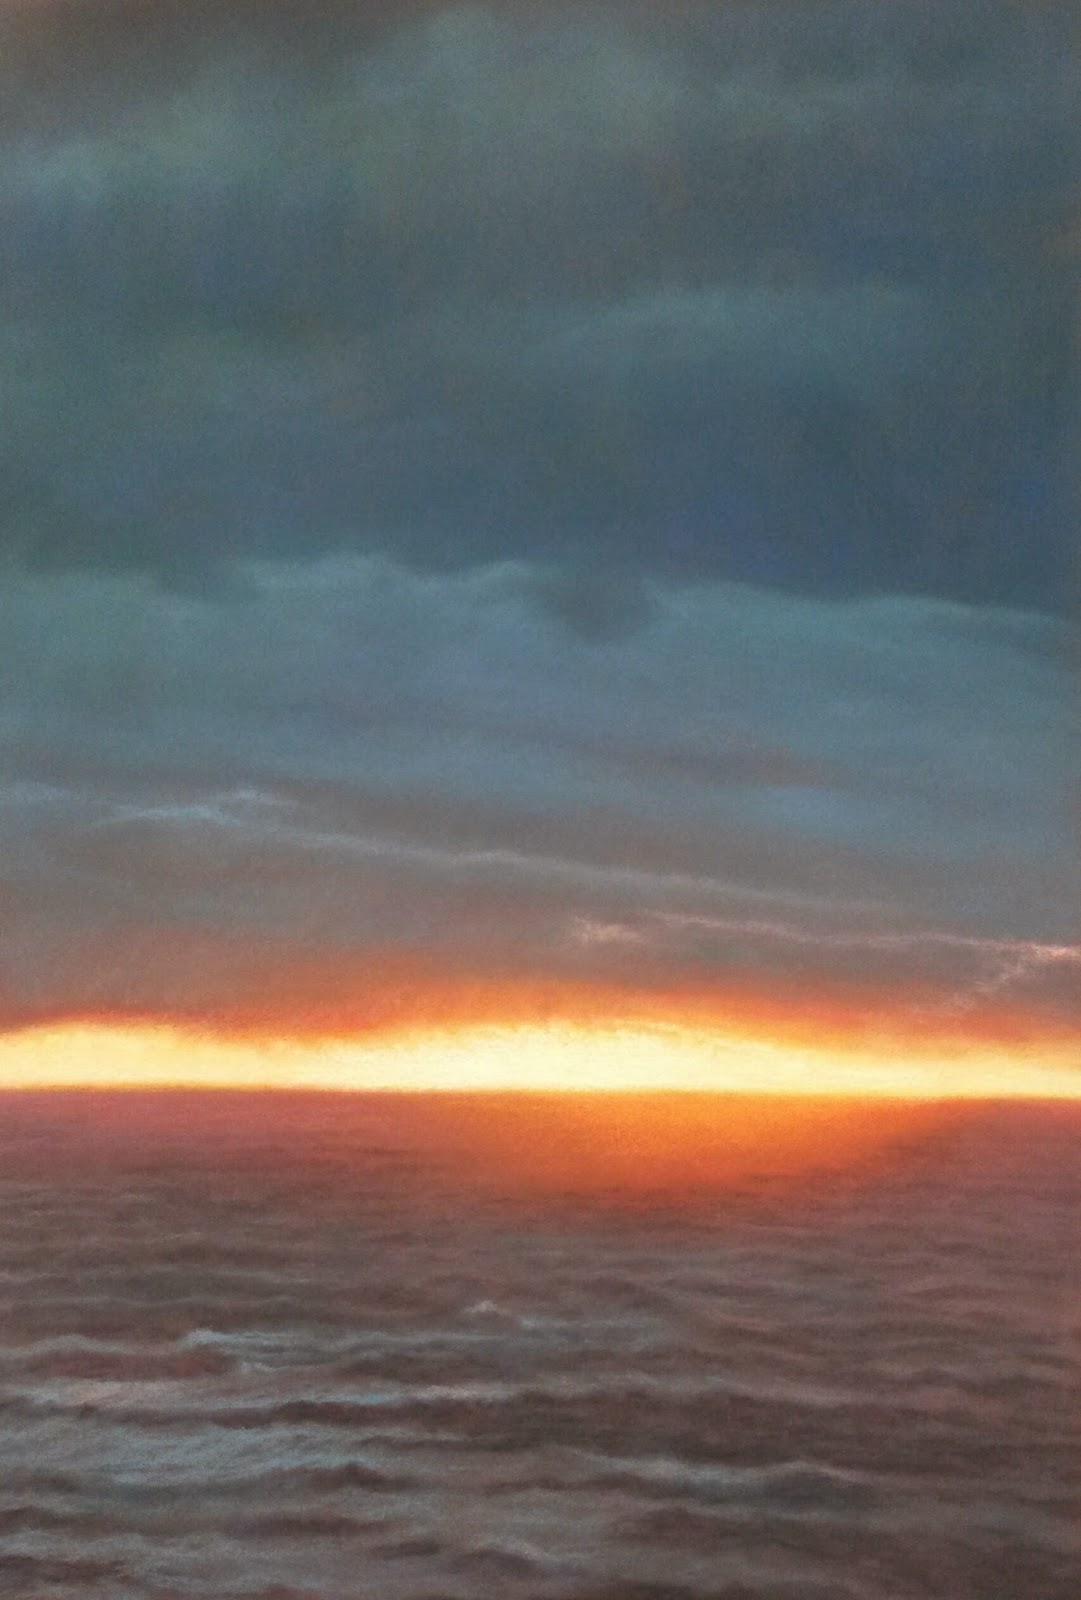 Sunset Glow-Michael Howley Artist. A signed limited edition print from an original soft pastel painting